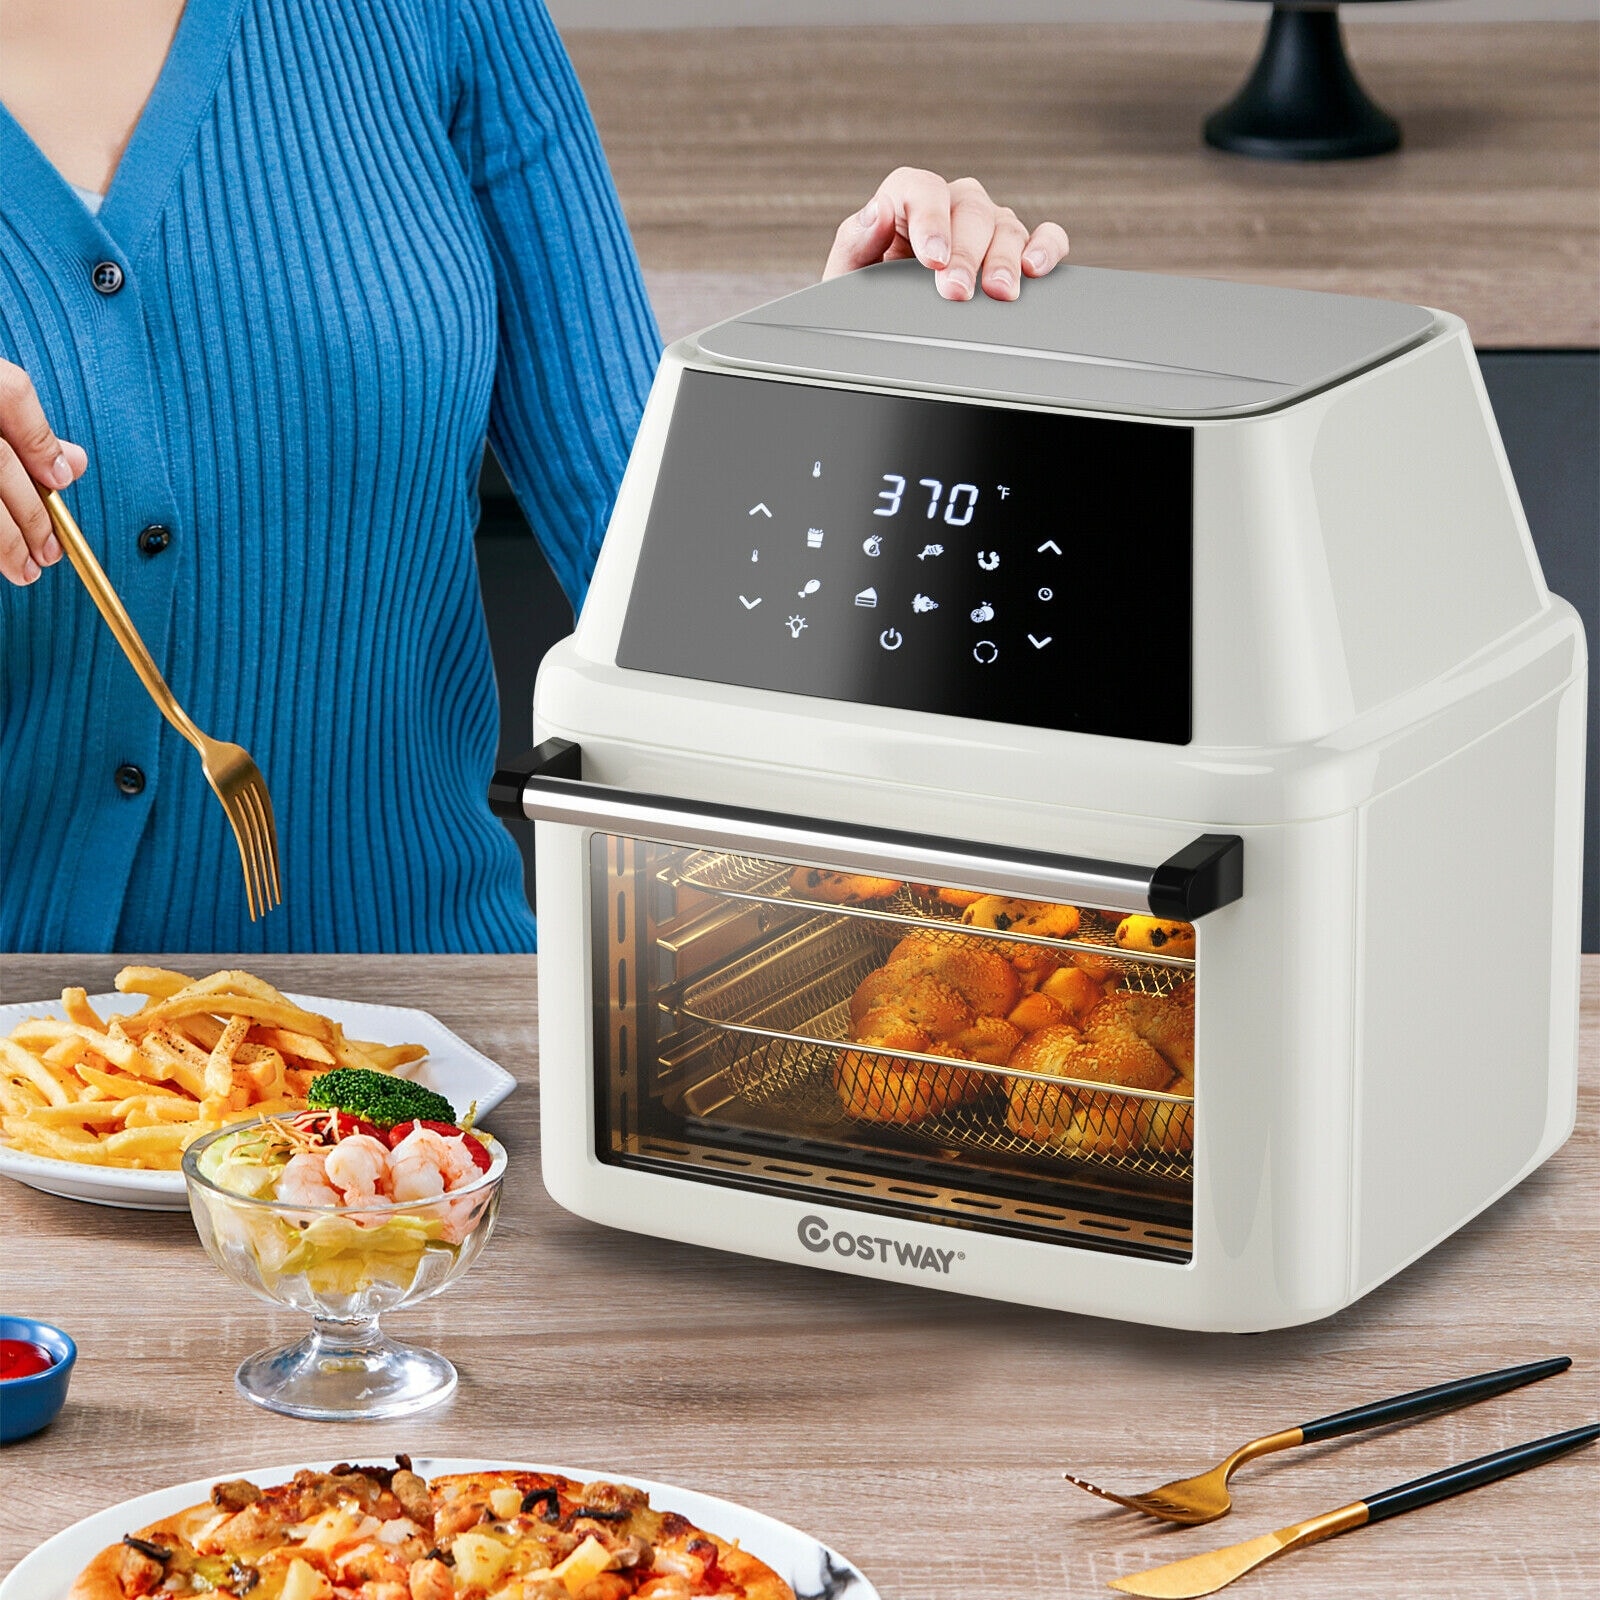 https://ak1.ostkcdn.com/images/products/is/images/direct/aa072b8db9343f061a6a3c037ff84946da265689/Costway-19-QT-Multi-functional-Air-Fryer-Oven-Dehydrator-Rotisserie.jpg